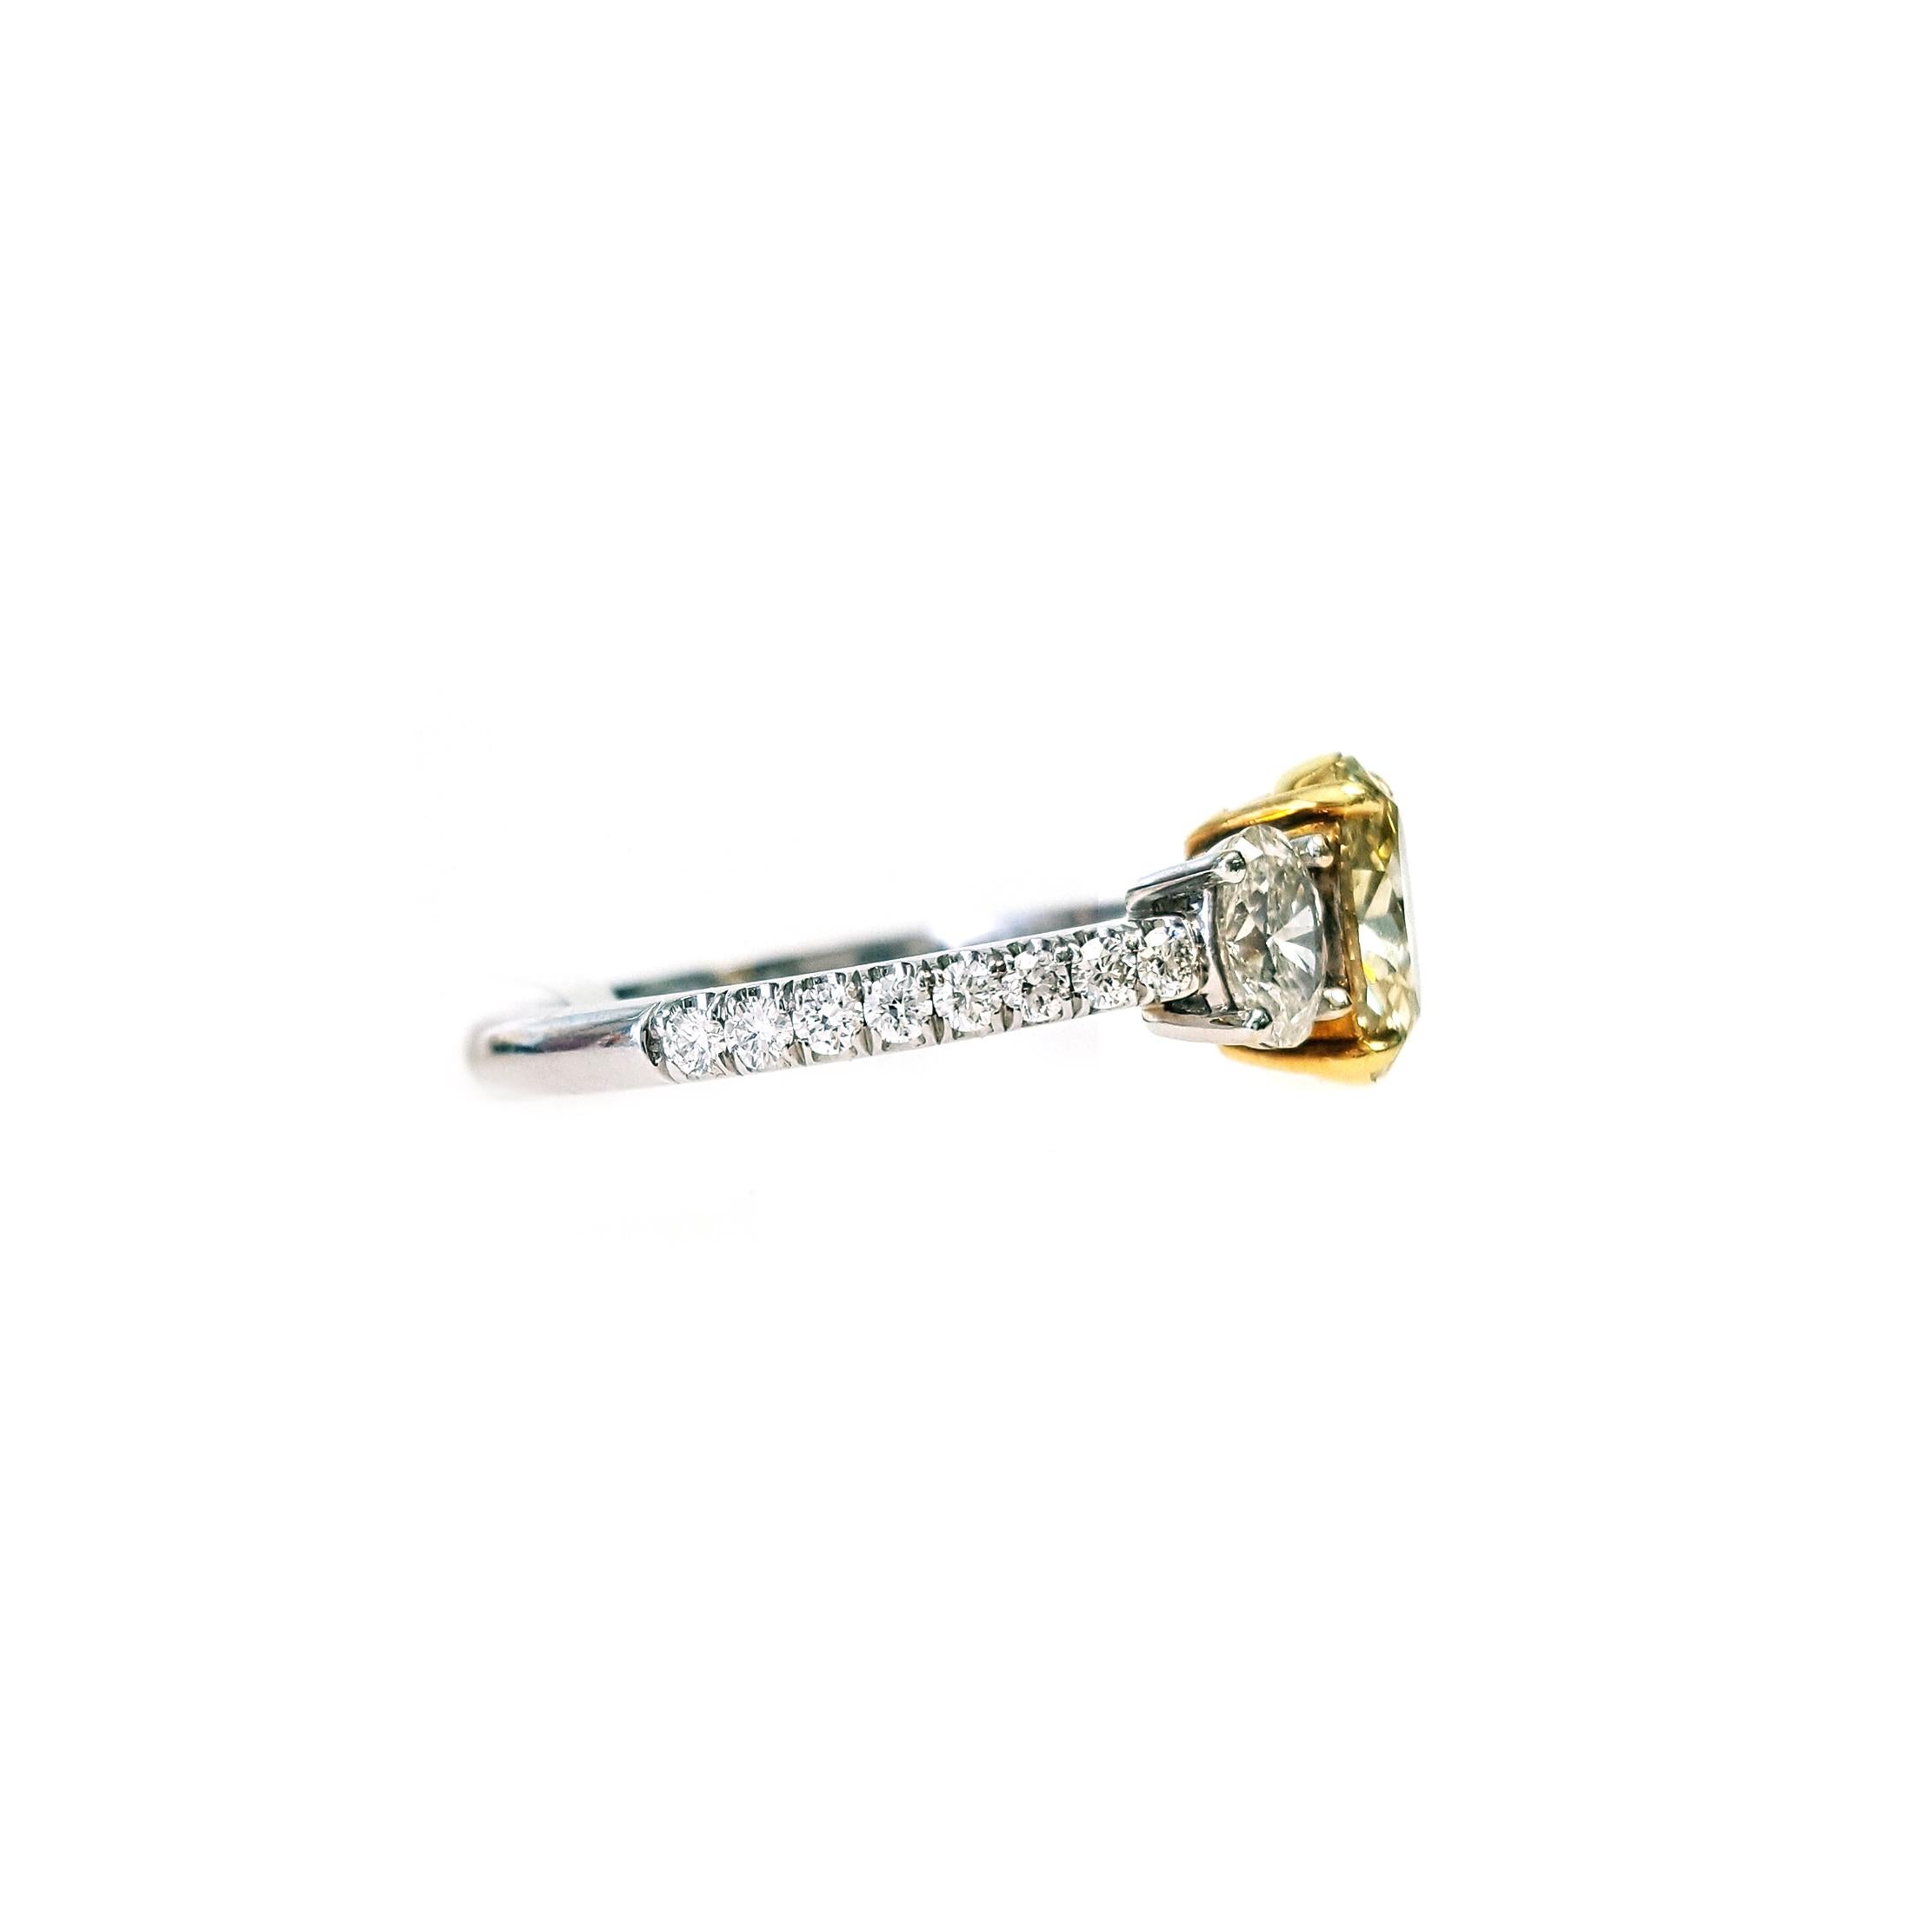 Oval Cut 1.30 Carat Fancy Yellow Oval Diamond Three-Stone Engagement Ring, GIA Certified. For Sale